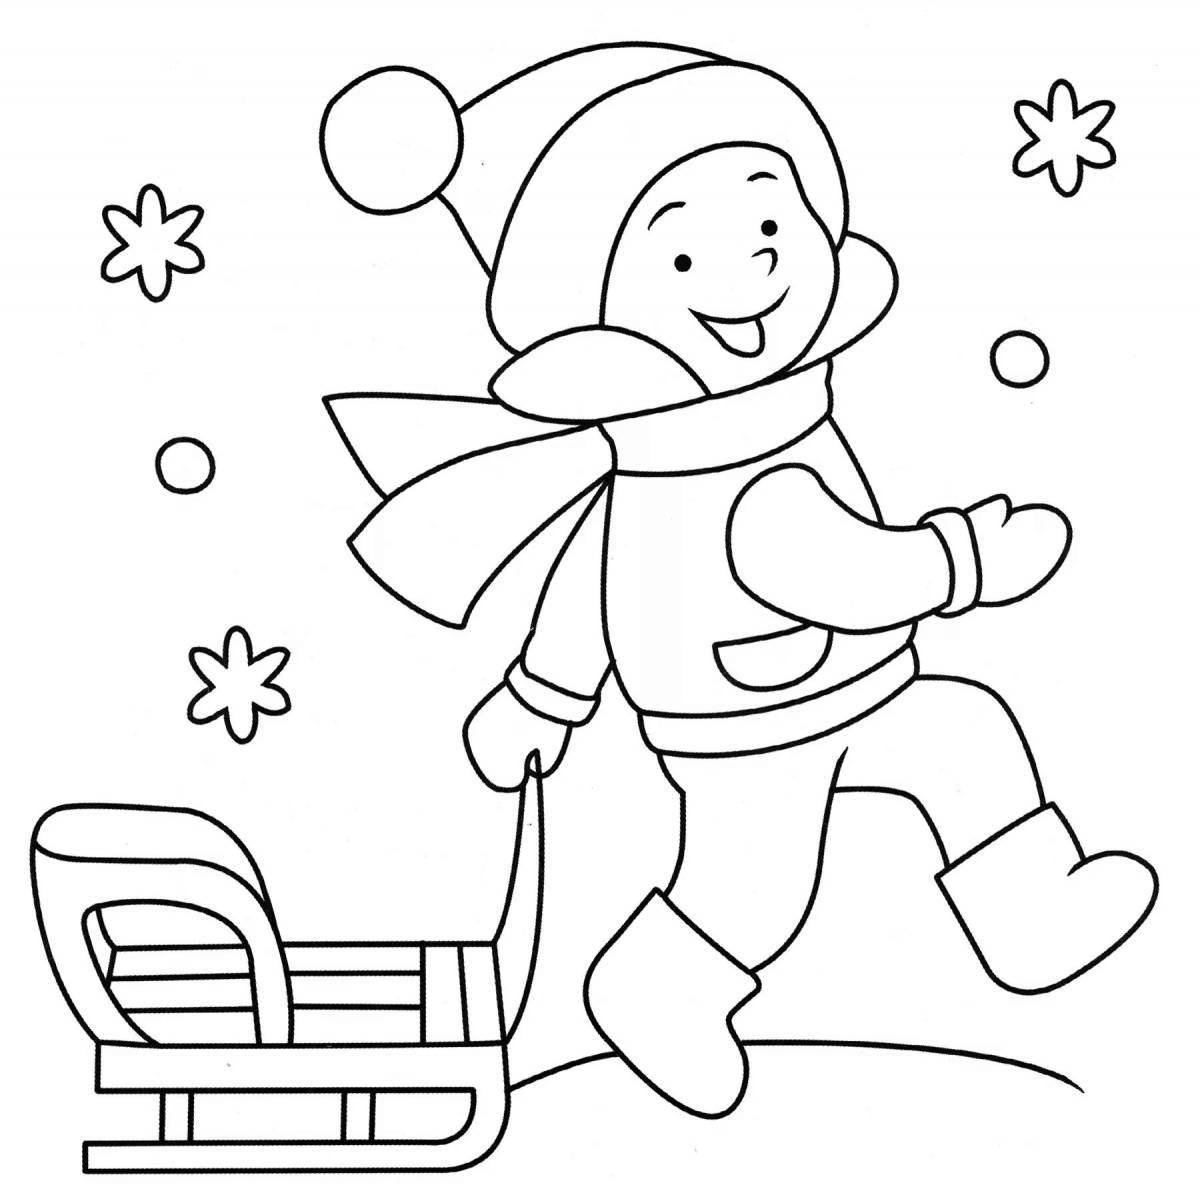 Joyful winter coloring for children 3 years old